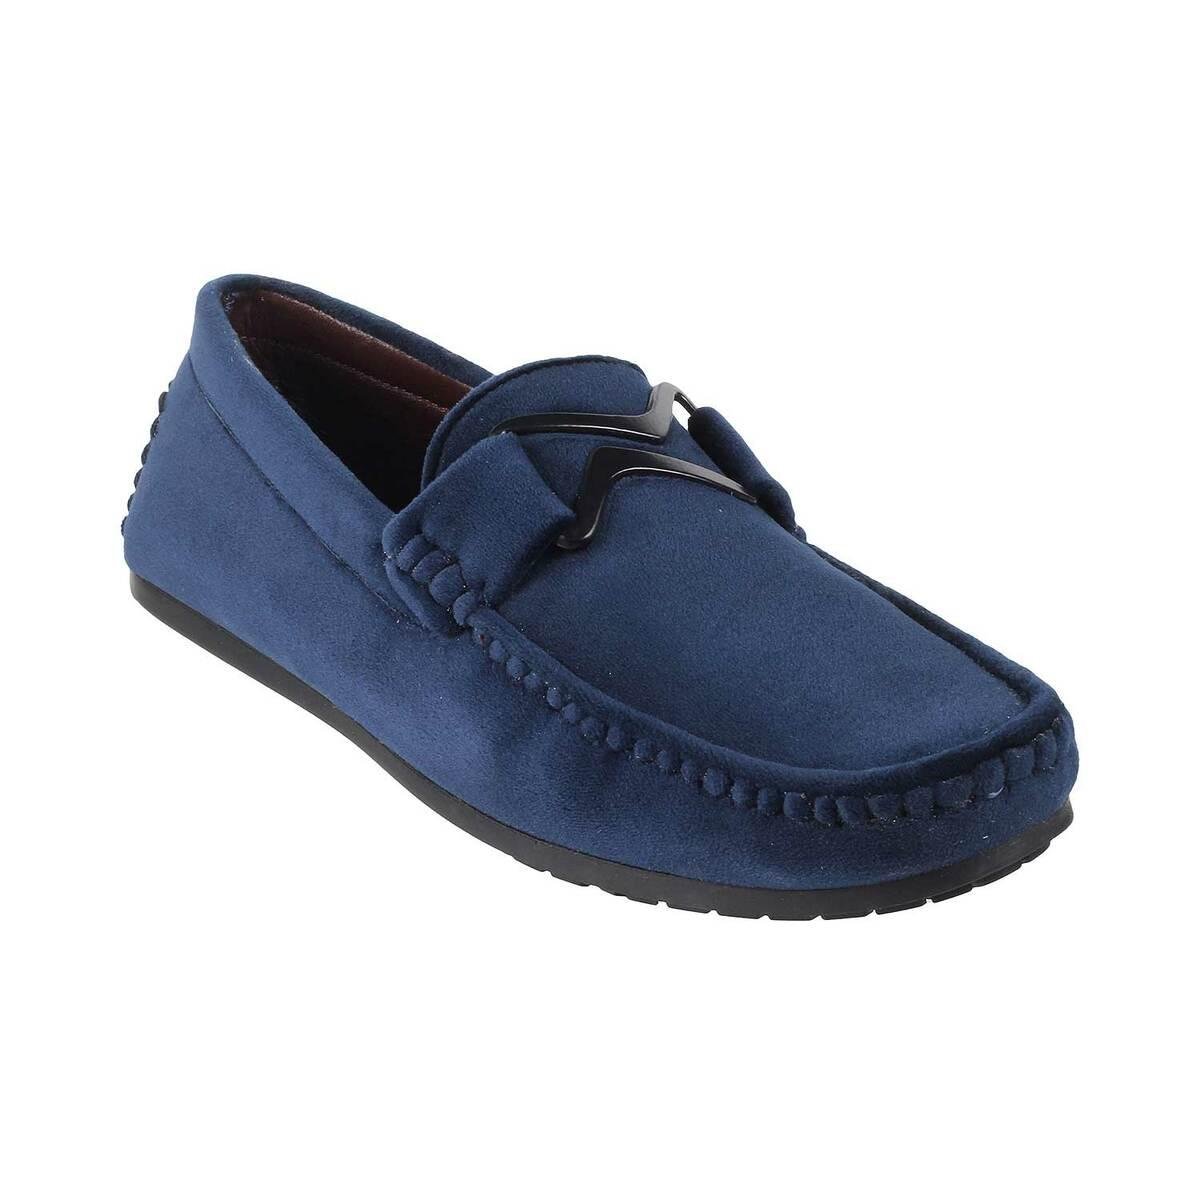 Blue Loafers Online | SKU: 71-9935-17-40-Metro Shoes